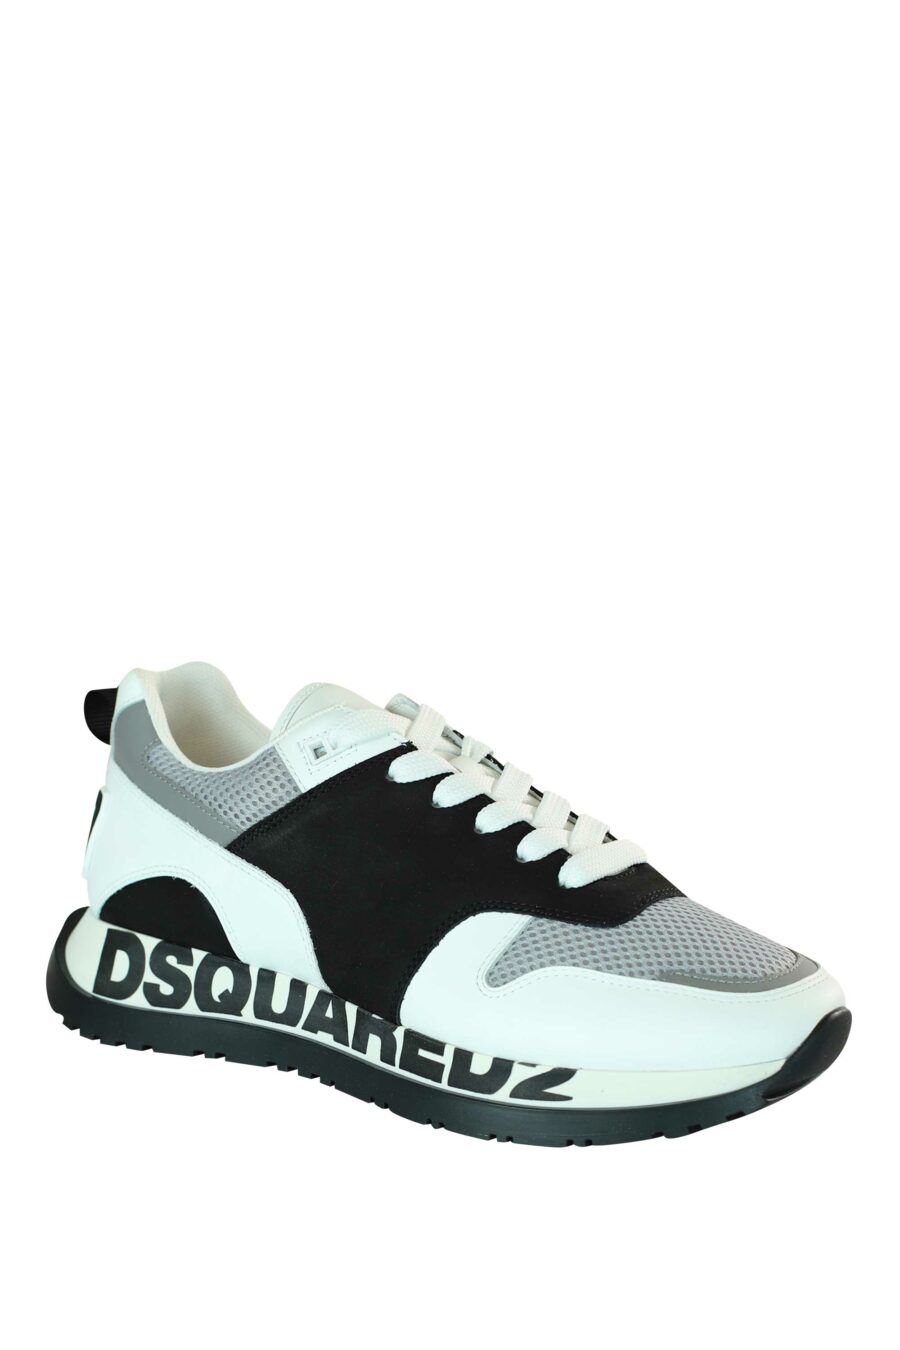 Black mix running shoes with logo on sole - 8055777205655 2